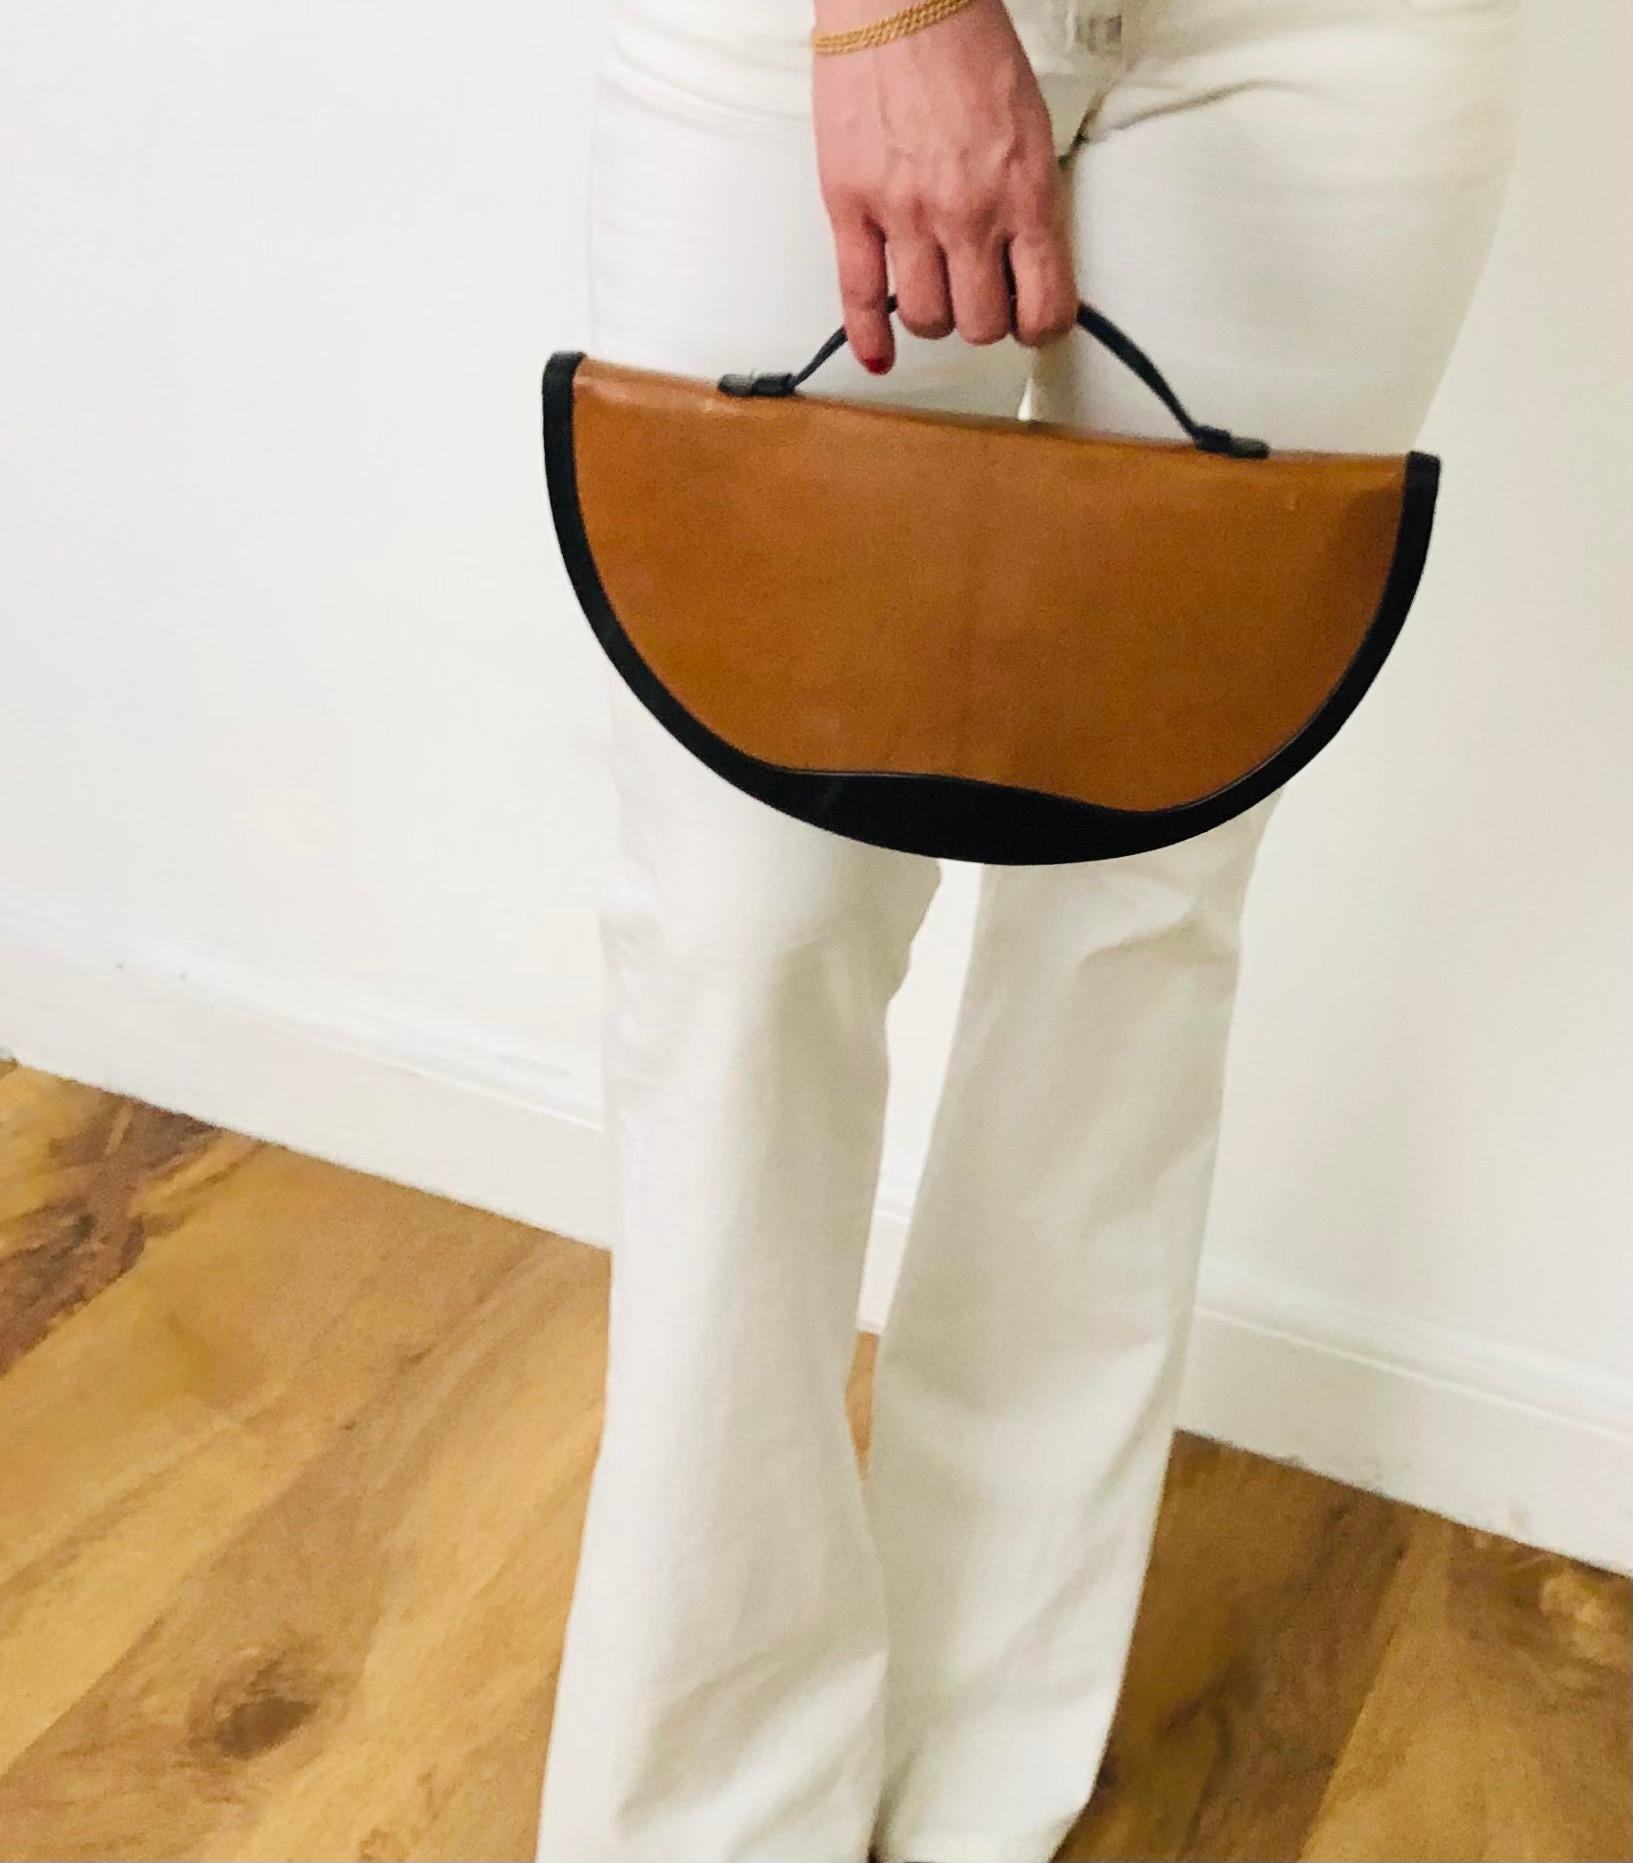 FREE UK and WORLDWIDE DELIVERY 

Elegant and rare Christian Dior half moon bag featuring shiny black and brown leather, small top handle, inside pocket. 
Condition: vintage, 1970s, slight signs of wear on the back due to age but overall very good